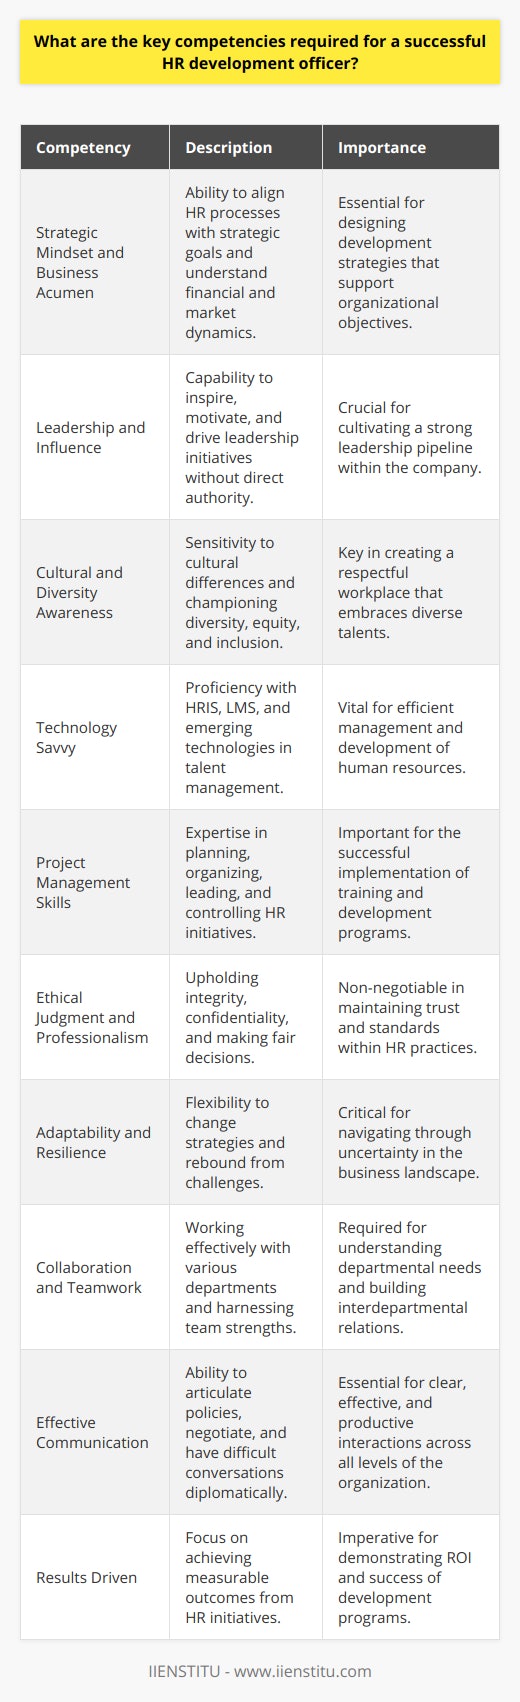 A successful Human Resource (HR) Development Officer plays a pivotal role in cultivating an effective workforce that can adapt and excel in a fast-paced, ever-changing business landscape. The following are key competencies required to excel in this position.**Strategic Mindset and Business Acumen**HR Development Officers must understand the business deeply and see the bigger picture. They should align HR processes with the company's strategic goals and contribute to long-term business planning. Understanding financial acumen, market trends, and operational dynamics enable them to design relevant development strategies that support the organization’s objectives.**Leadership and Influence**HR professionals are expected to be leaders who can influence without direct authority. They should inspire trust and motivate employees and management alike. A successful HR Development Officer leads by example and drives leadership initiatives that cultivate a strong company leadership pipeline.**Cultural and Diversity Awareness**In today’s global business environment, an HR Development Officer needs to be aware of and sensitive to cultural and diversity issues within the workforce. They should champion programs that promote diversity, equity, and inclusion, thereby creating a respectful and welcoming workplace where all employees can thrive.**Technology Savvy**With HR technology constantly evolving, staying proficient with the latest systems and platforms is crucial. This may include Human Resource Information Systems (HRIS), Learning Management Systems (LMS), and other emerging technologies that facilitate more efficient talent management and development processes.**Project Management Skills**HR Development Officers frequently oversee projects such as implementing new training modules or rolling out development initiatives. Effective project management skills, including planning, organizing, leading, and controlling resources, timelines, and deliverables, are vital to ensure these projects are successful.**Ethical Judgment and Professionalism**Exercising ethical judgment and maintaining a high level of professionalism is non-negotiable in HR. They must be the standard-bearers for company integrity and ethical behavior, dealing with sensitive information confidentially and making fair decisions that affect employees' livelihoods.**Adaptability and Resilience**The ability to navigate uncertainty and bounce back from setbacks is essential. An HR Development Officer must be adaptable, ready to shift strategies and approaches when company policies, market conditions, or workforce needs change.**Collaboration and Teamwork**Although they may lead HR development efforts, these officers must collaborate across various departments to understand departmental needs and the skills required. They must work effectively with others, harnessing cross-functional team strengths, and creating synergies.**Effective Communication**Perhaps one of the most critical competencies, an HR Development Officer should master the art of communication. This includes writing clear policies, giving presentations, negotiating with vendors, and having difficult conversations – all with clarity, diplomacy, and effectiveness.**Results Driven**Measurable outcomes are key in assessing the success of HR initiatives, and so HR Development Officers should be results-driven, ensuring that every training and development program has clear, quantifiable goals. An outcomes-focused approach enables the organization to gauge ROI from their human capital investments.In an age where the human element is increasingly recognized as central to business success, HR Development Officers are strategic partners in navigating that reality. Balancing interpersonal with technical skills, and coupling them with a strong understanding of the business, ensures they can effectively foster workforce development and thus contribute to the bottom line. These key competencies position them to be invaluable assets in nurturing and sustaining the human capital of any organization.